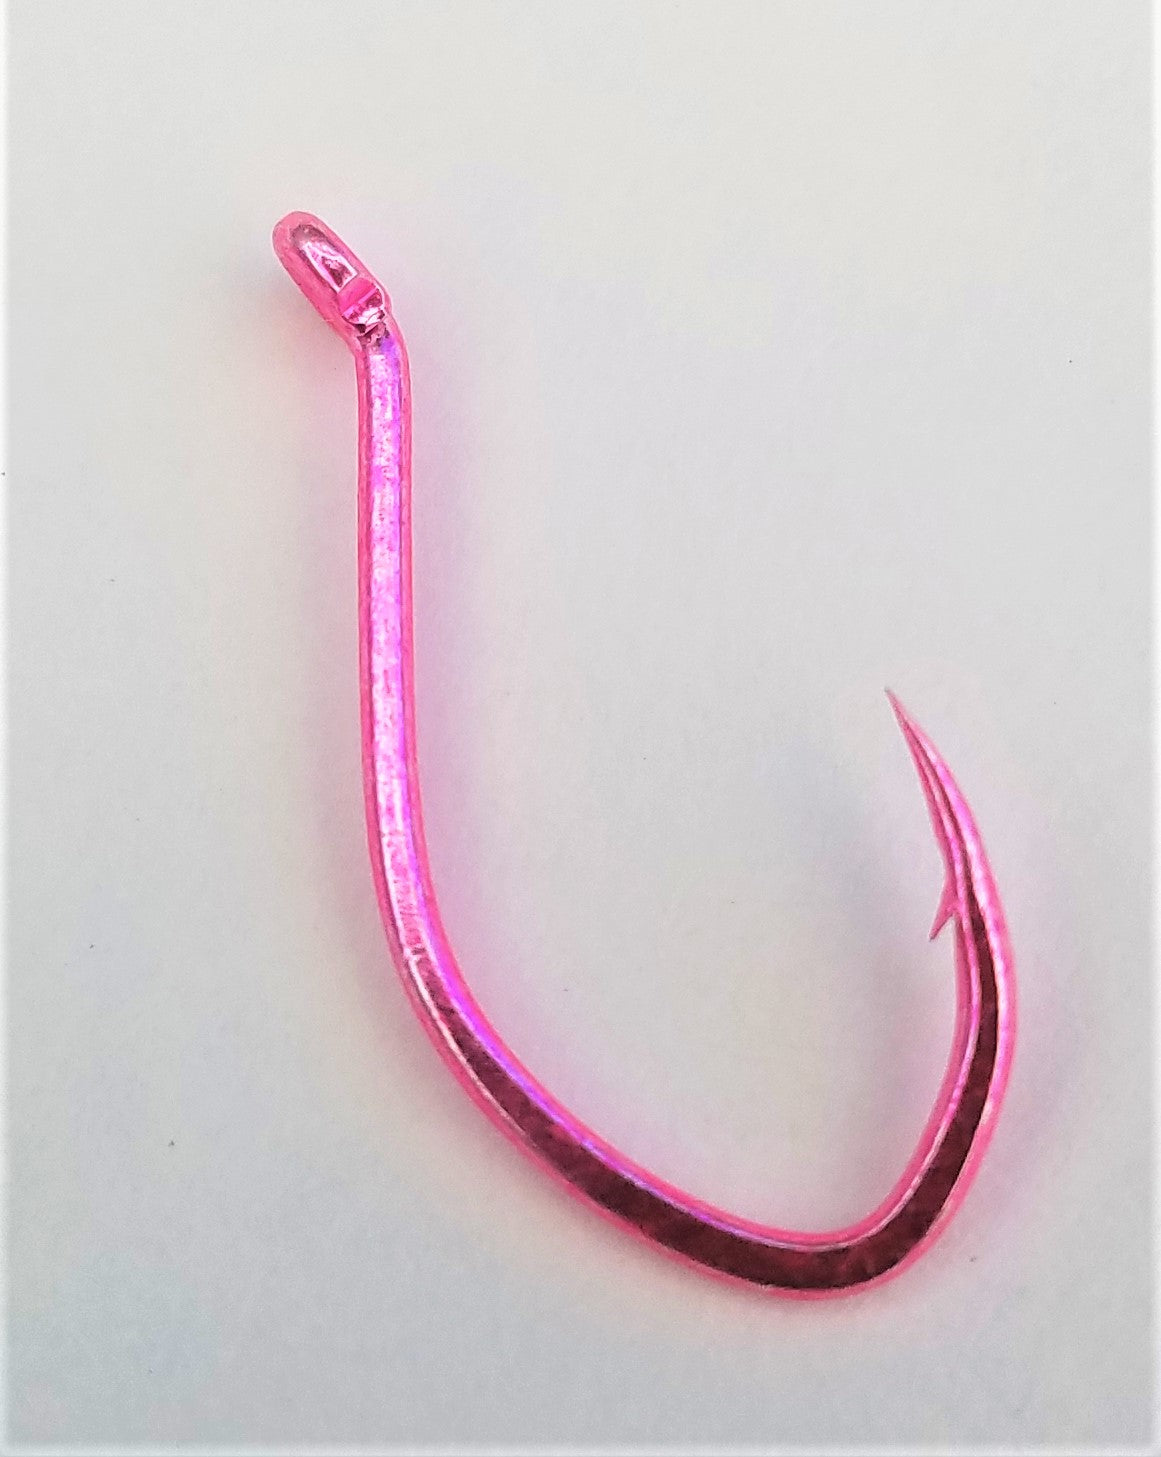 Barbless Sickle Hook: Red Maruto 4-8 Pack